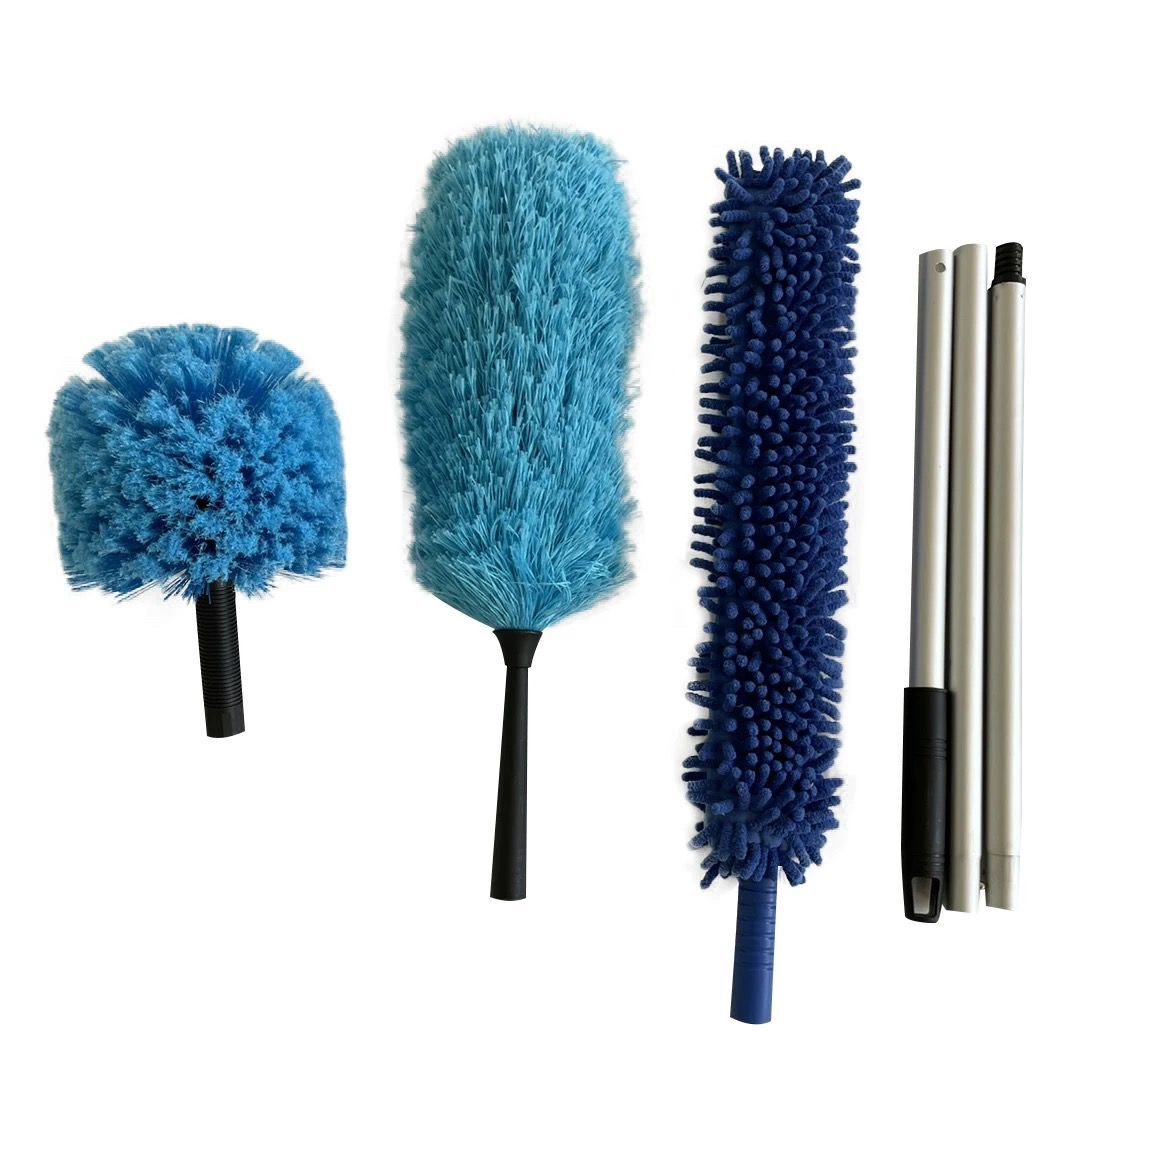 QL1005ZB   Ceiling brush with duster set